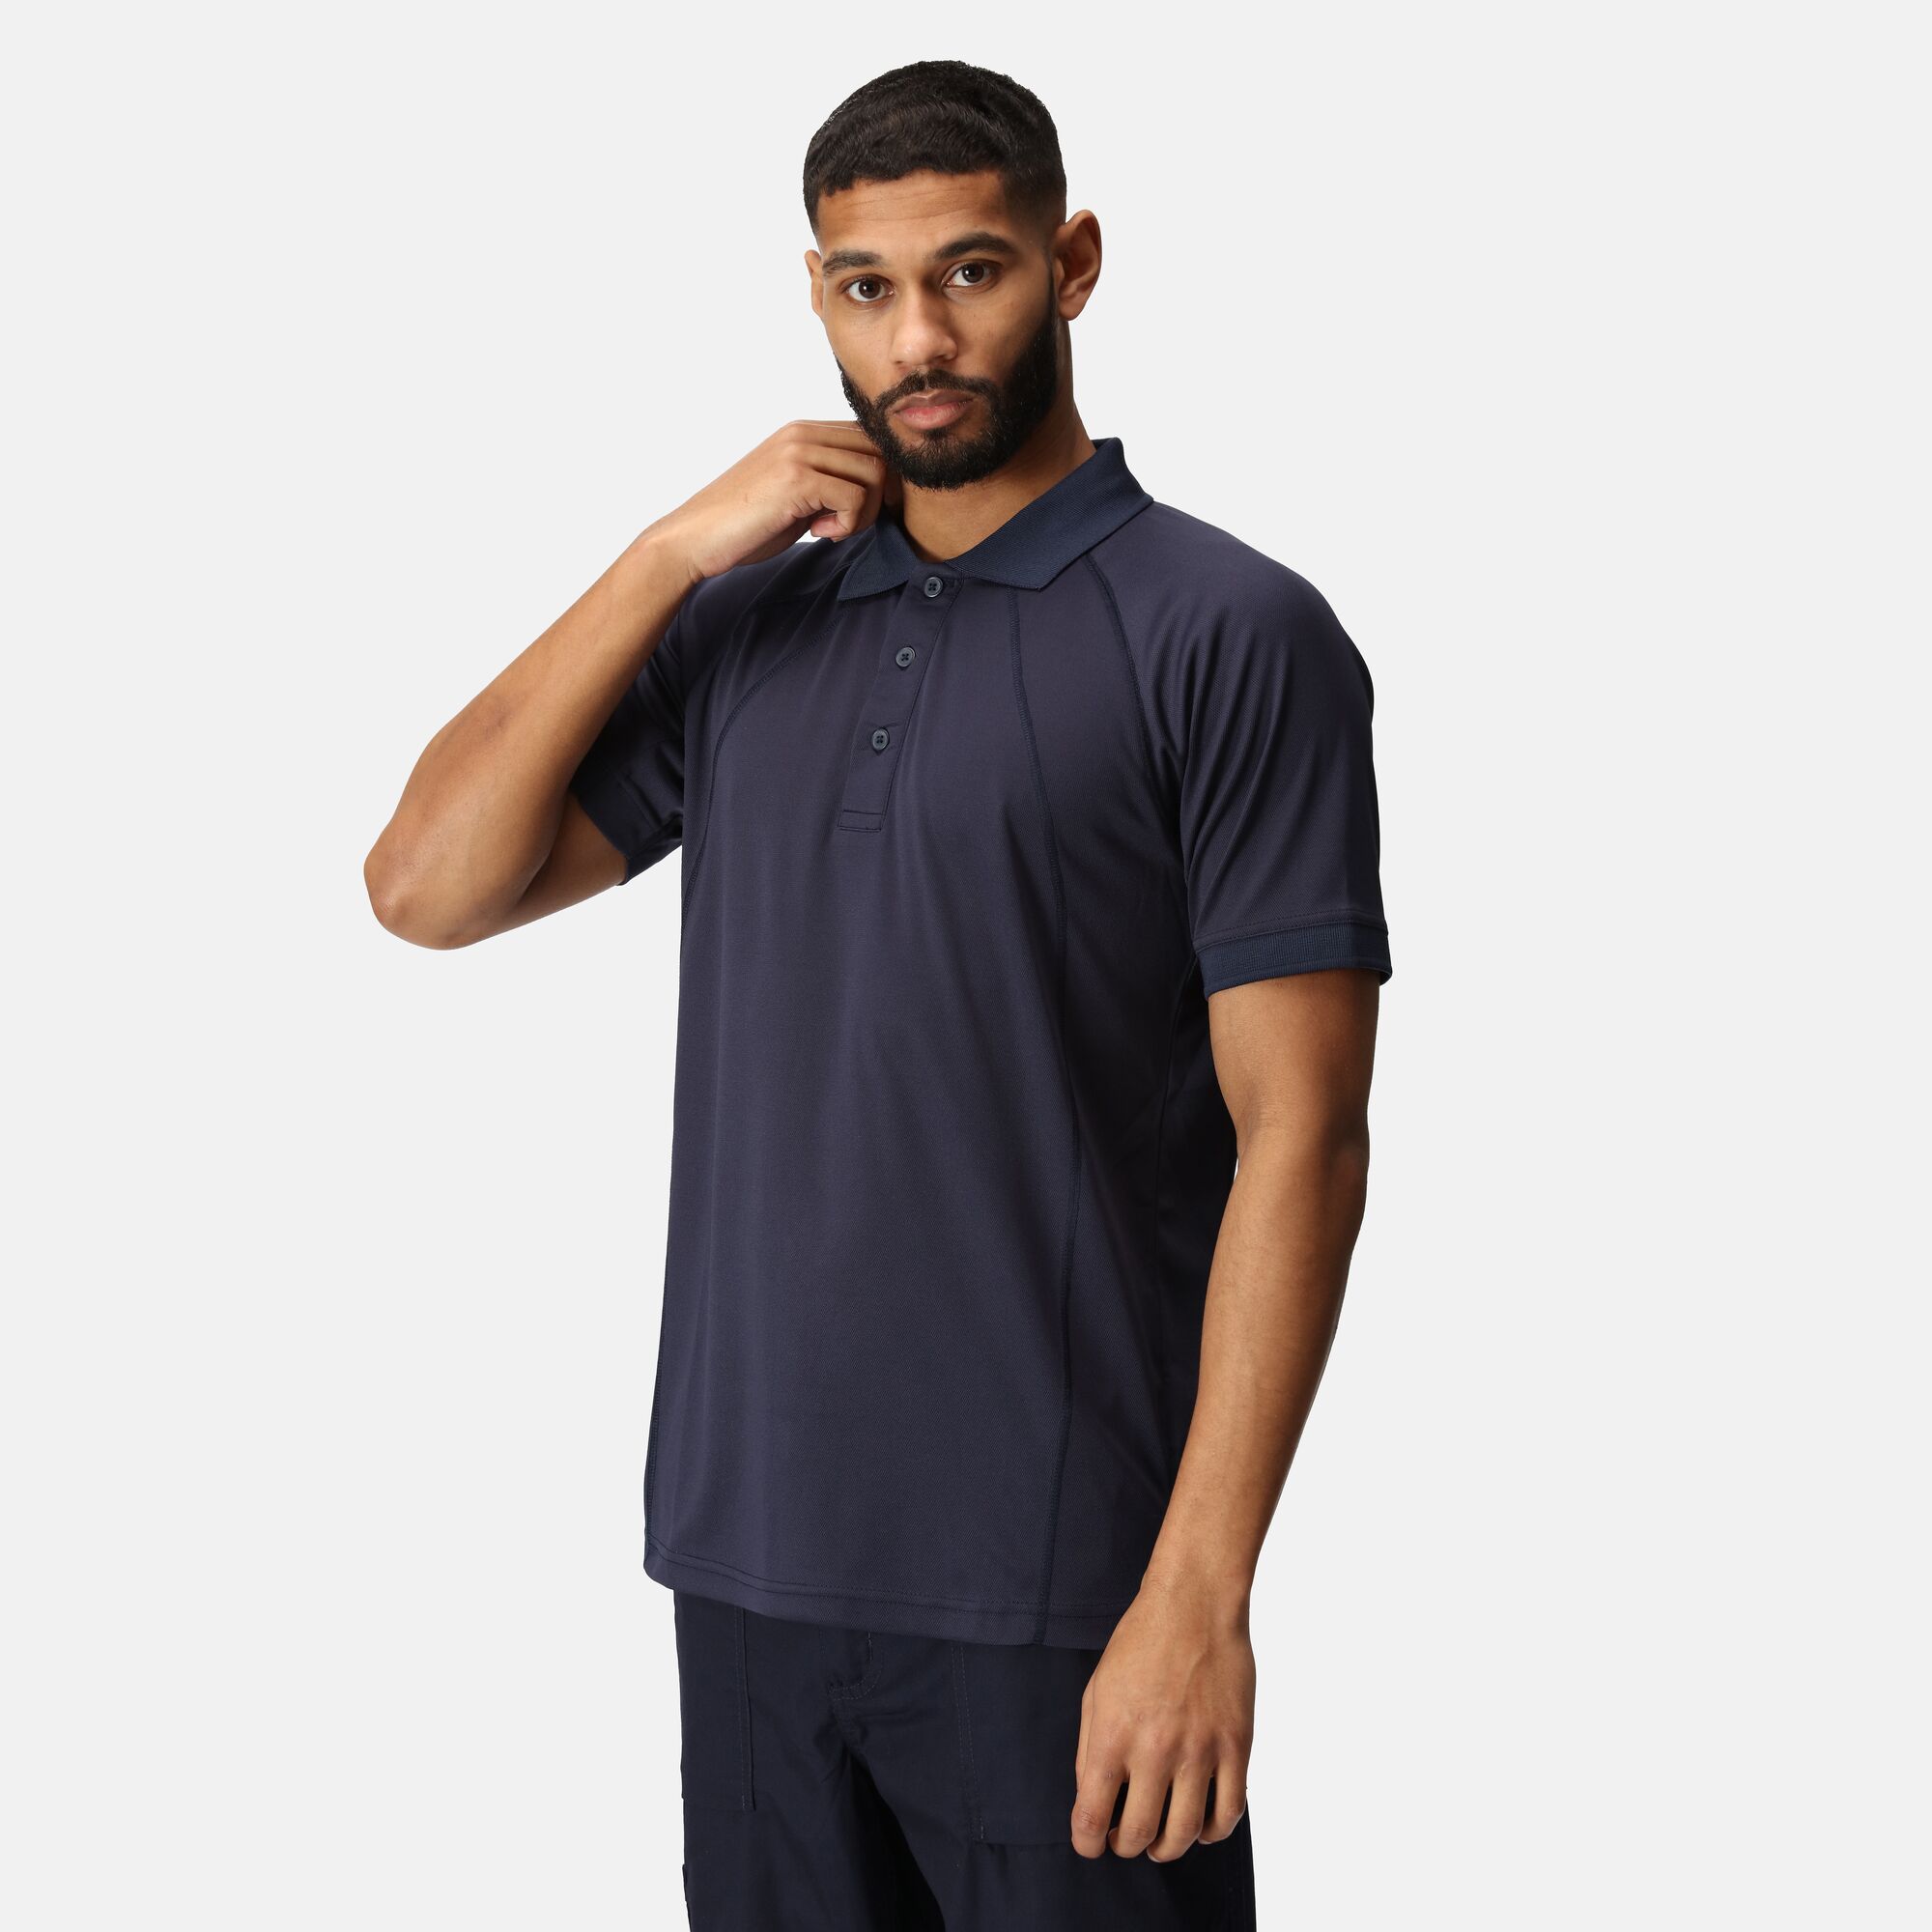 COOLWEAVE QUICK WICKING POLO SHIRT - Regatta Professional